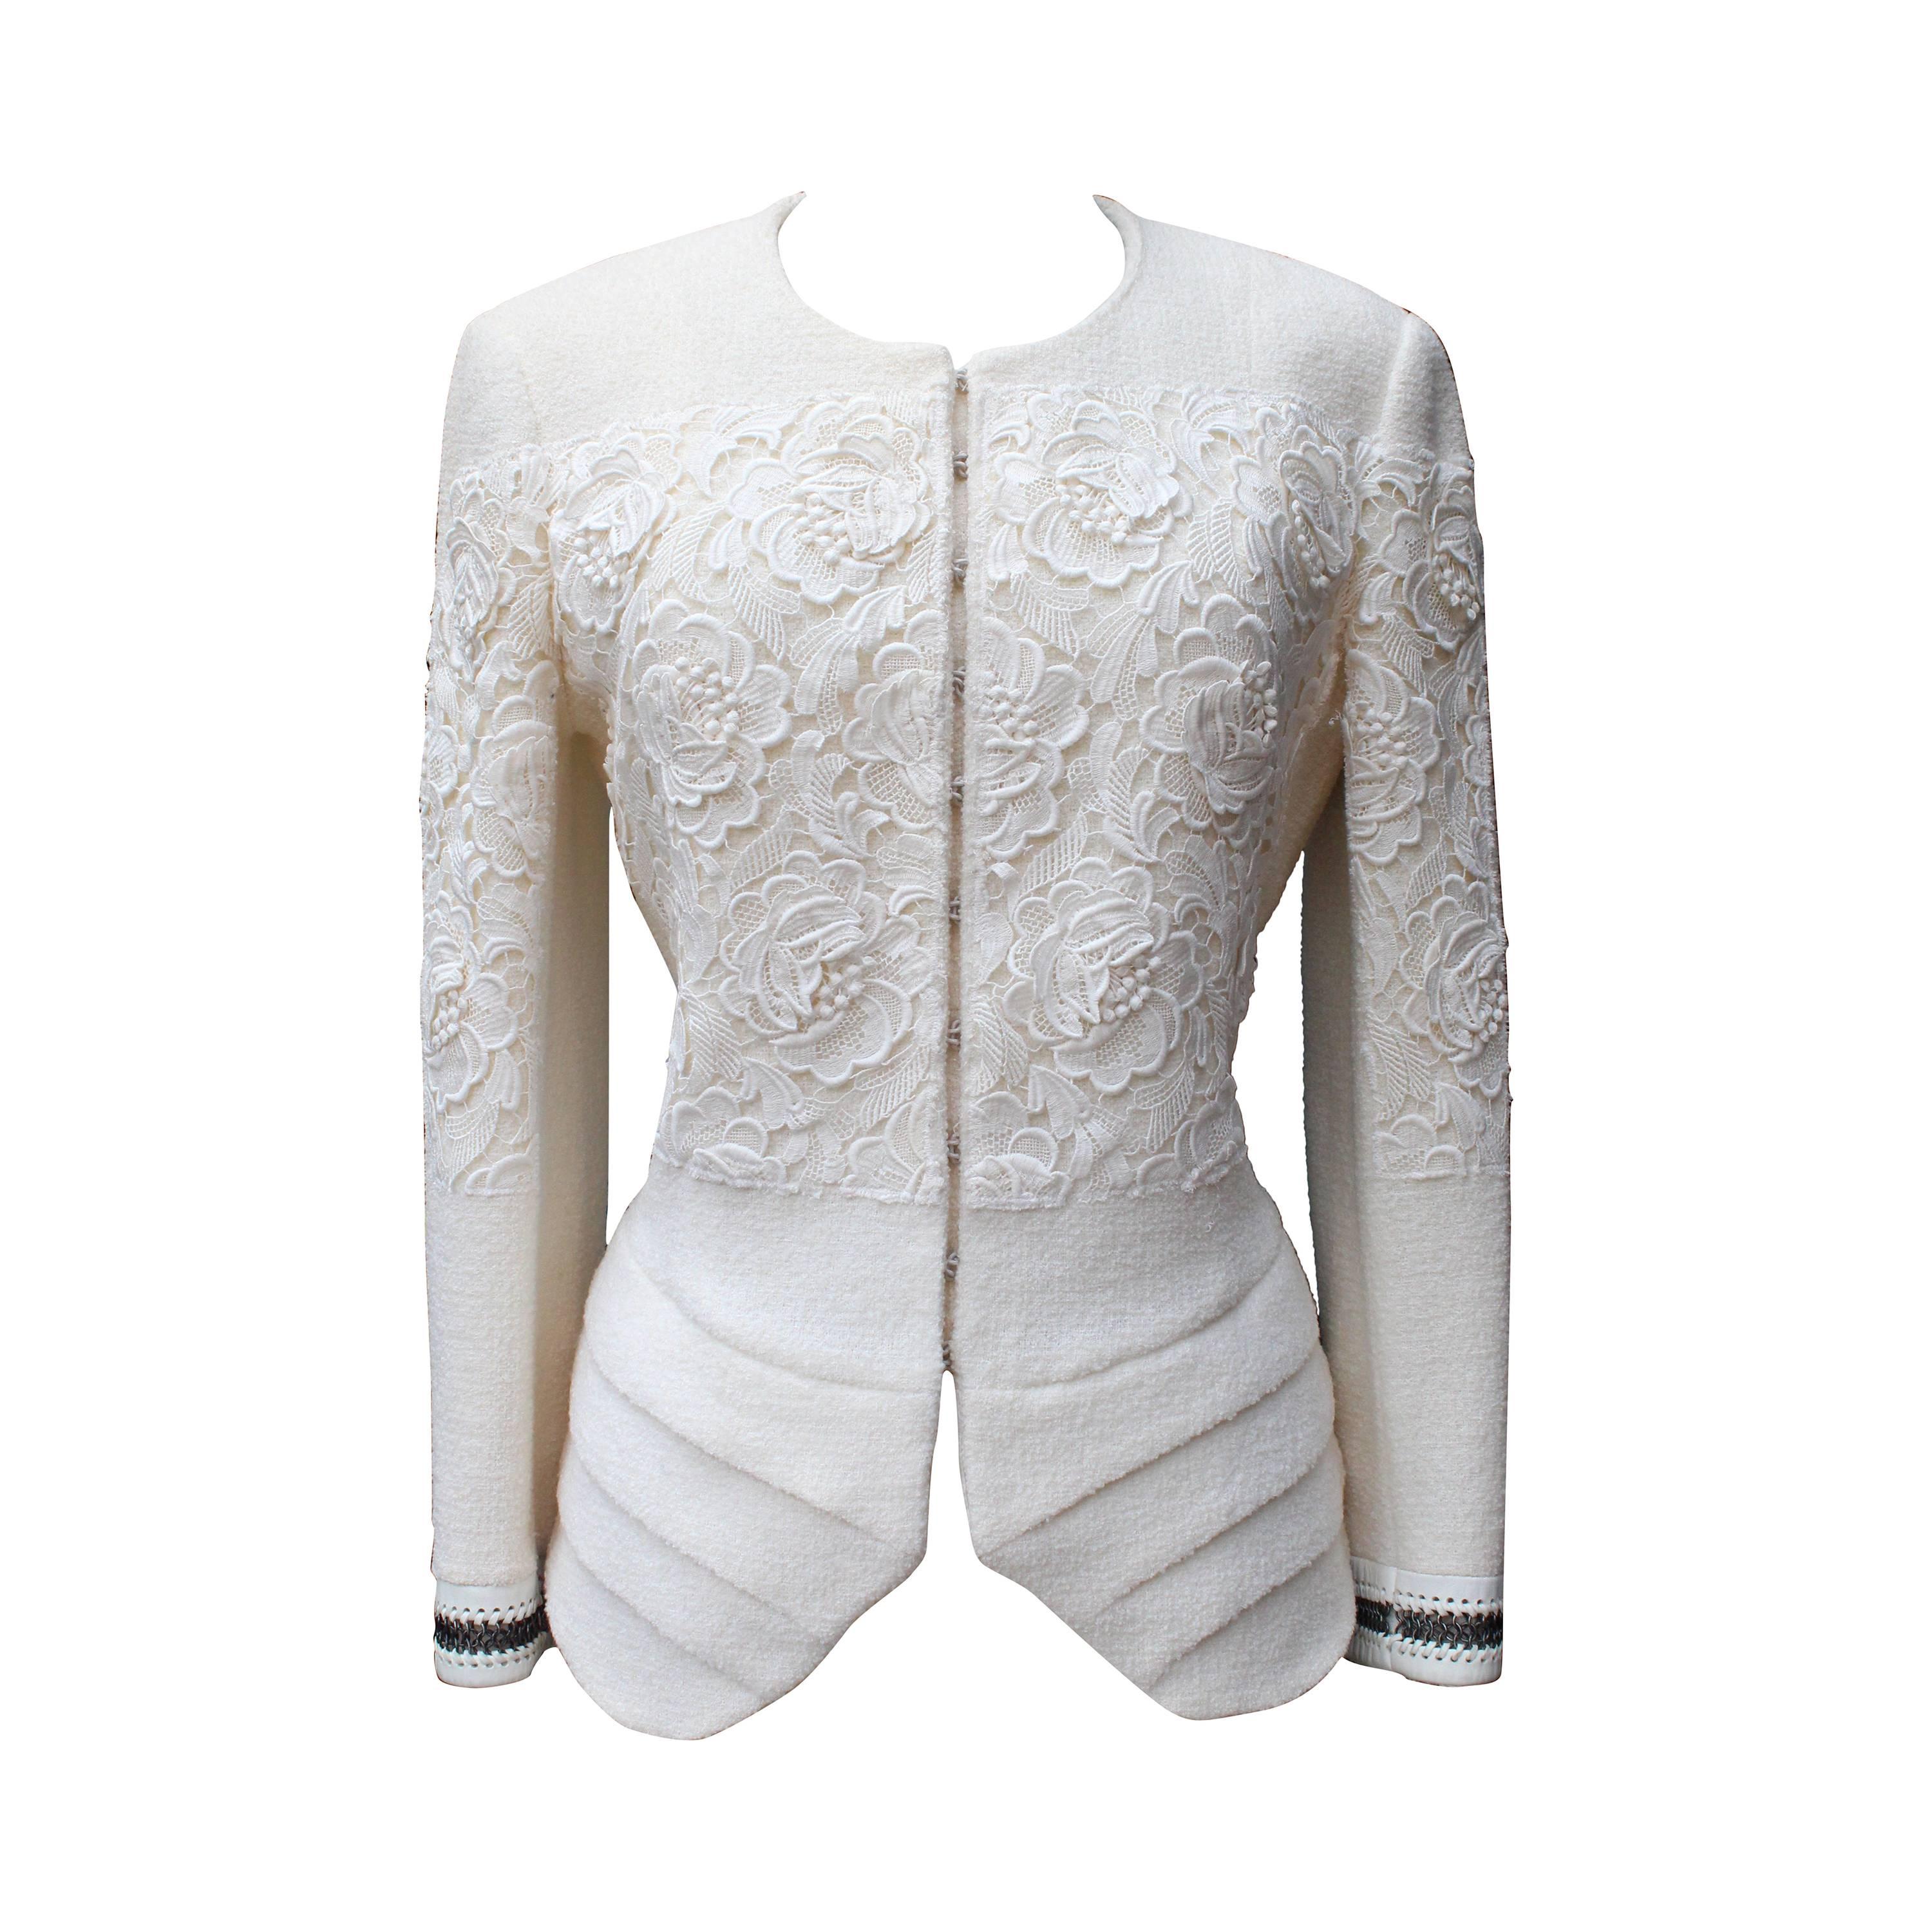 2000s Christian Dior Boutique Ivory Wool and Lace Jacket